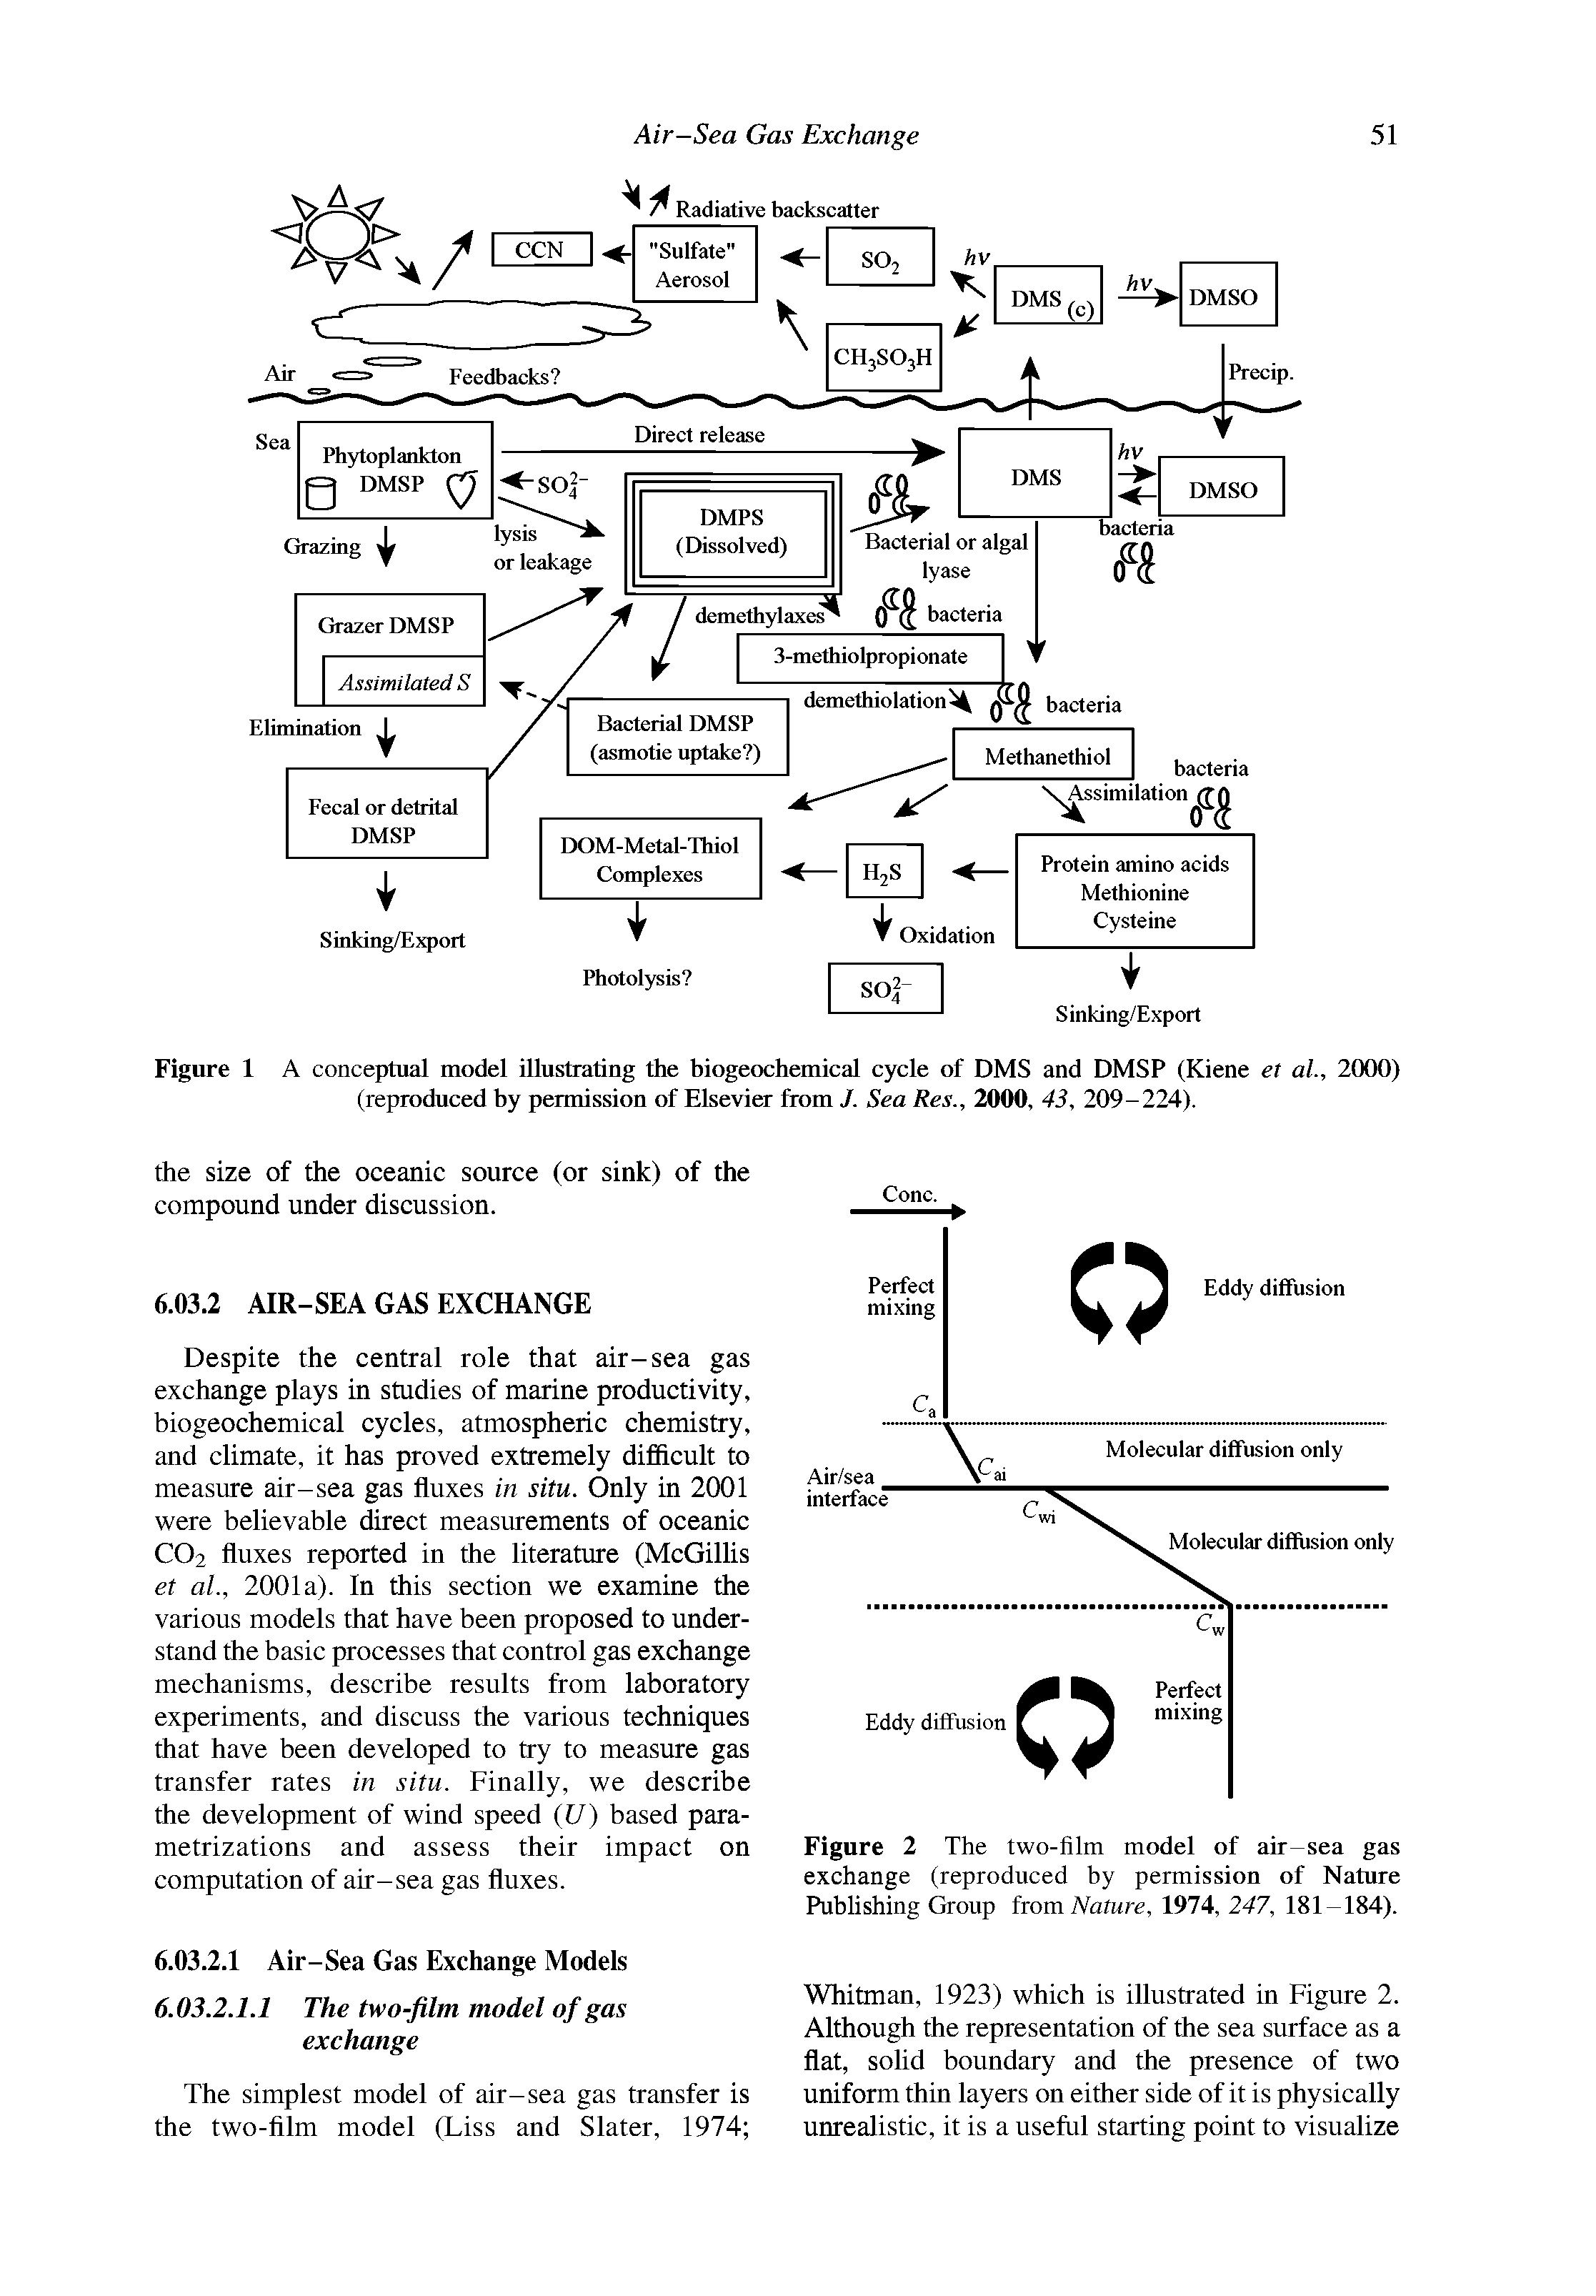 Figure 2 The two-film model of air-sea gas exchange (reproduced by permission of Nature Publishing Group fmmNature, 1974, 247, 181-184).